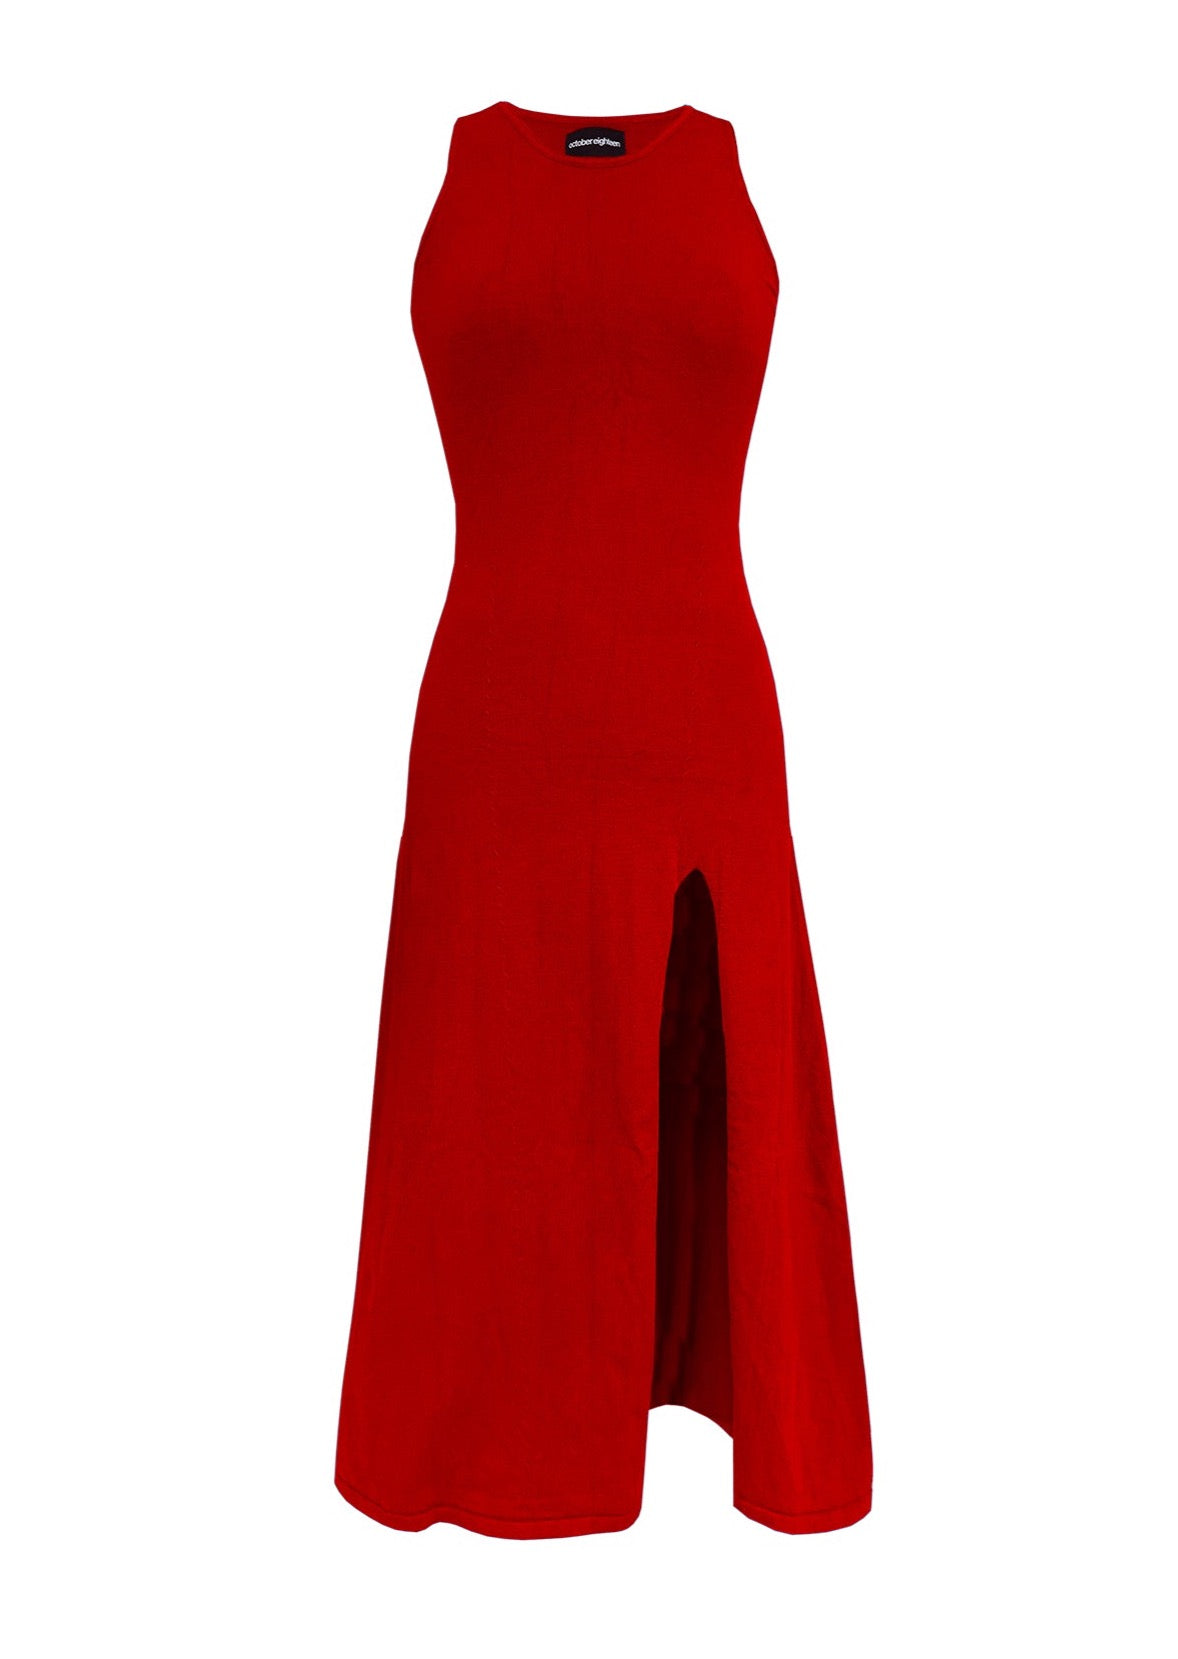 KELLY VERY HIGH SLIT KNIT DRESS IN SCARLET RED